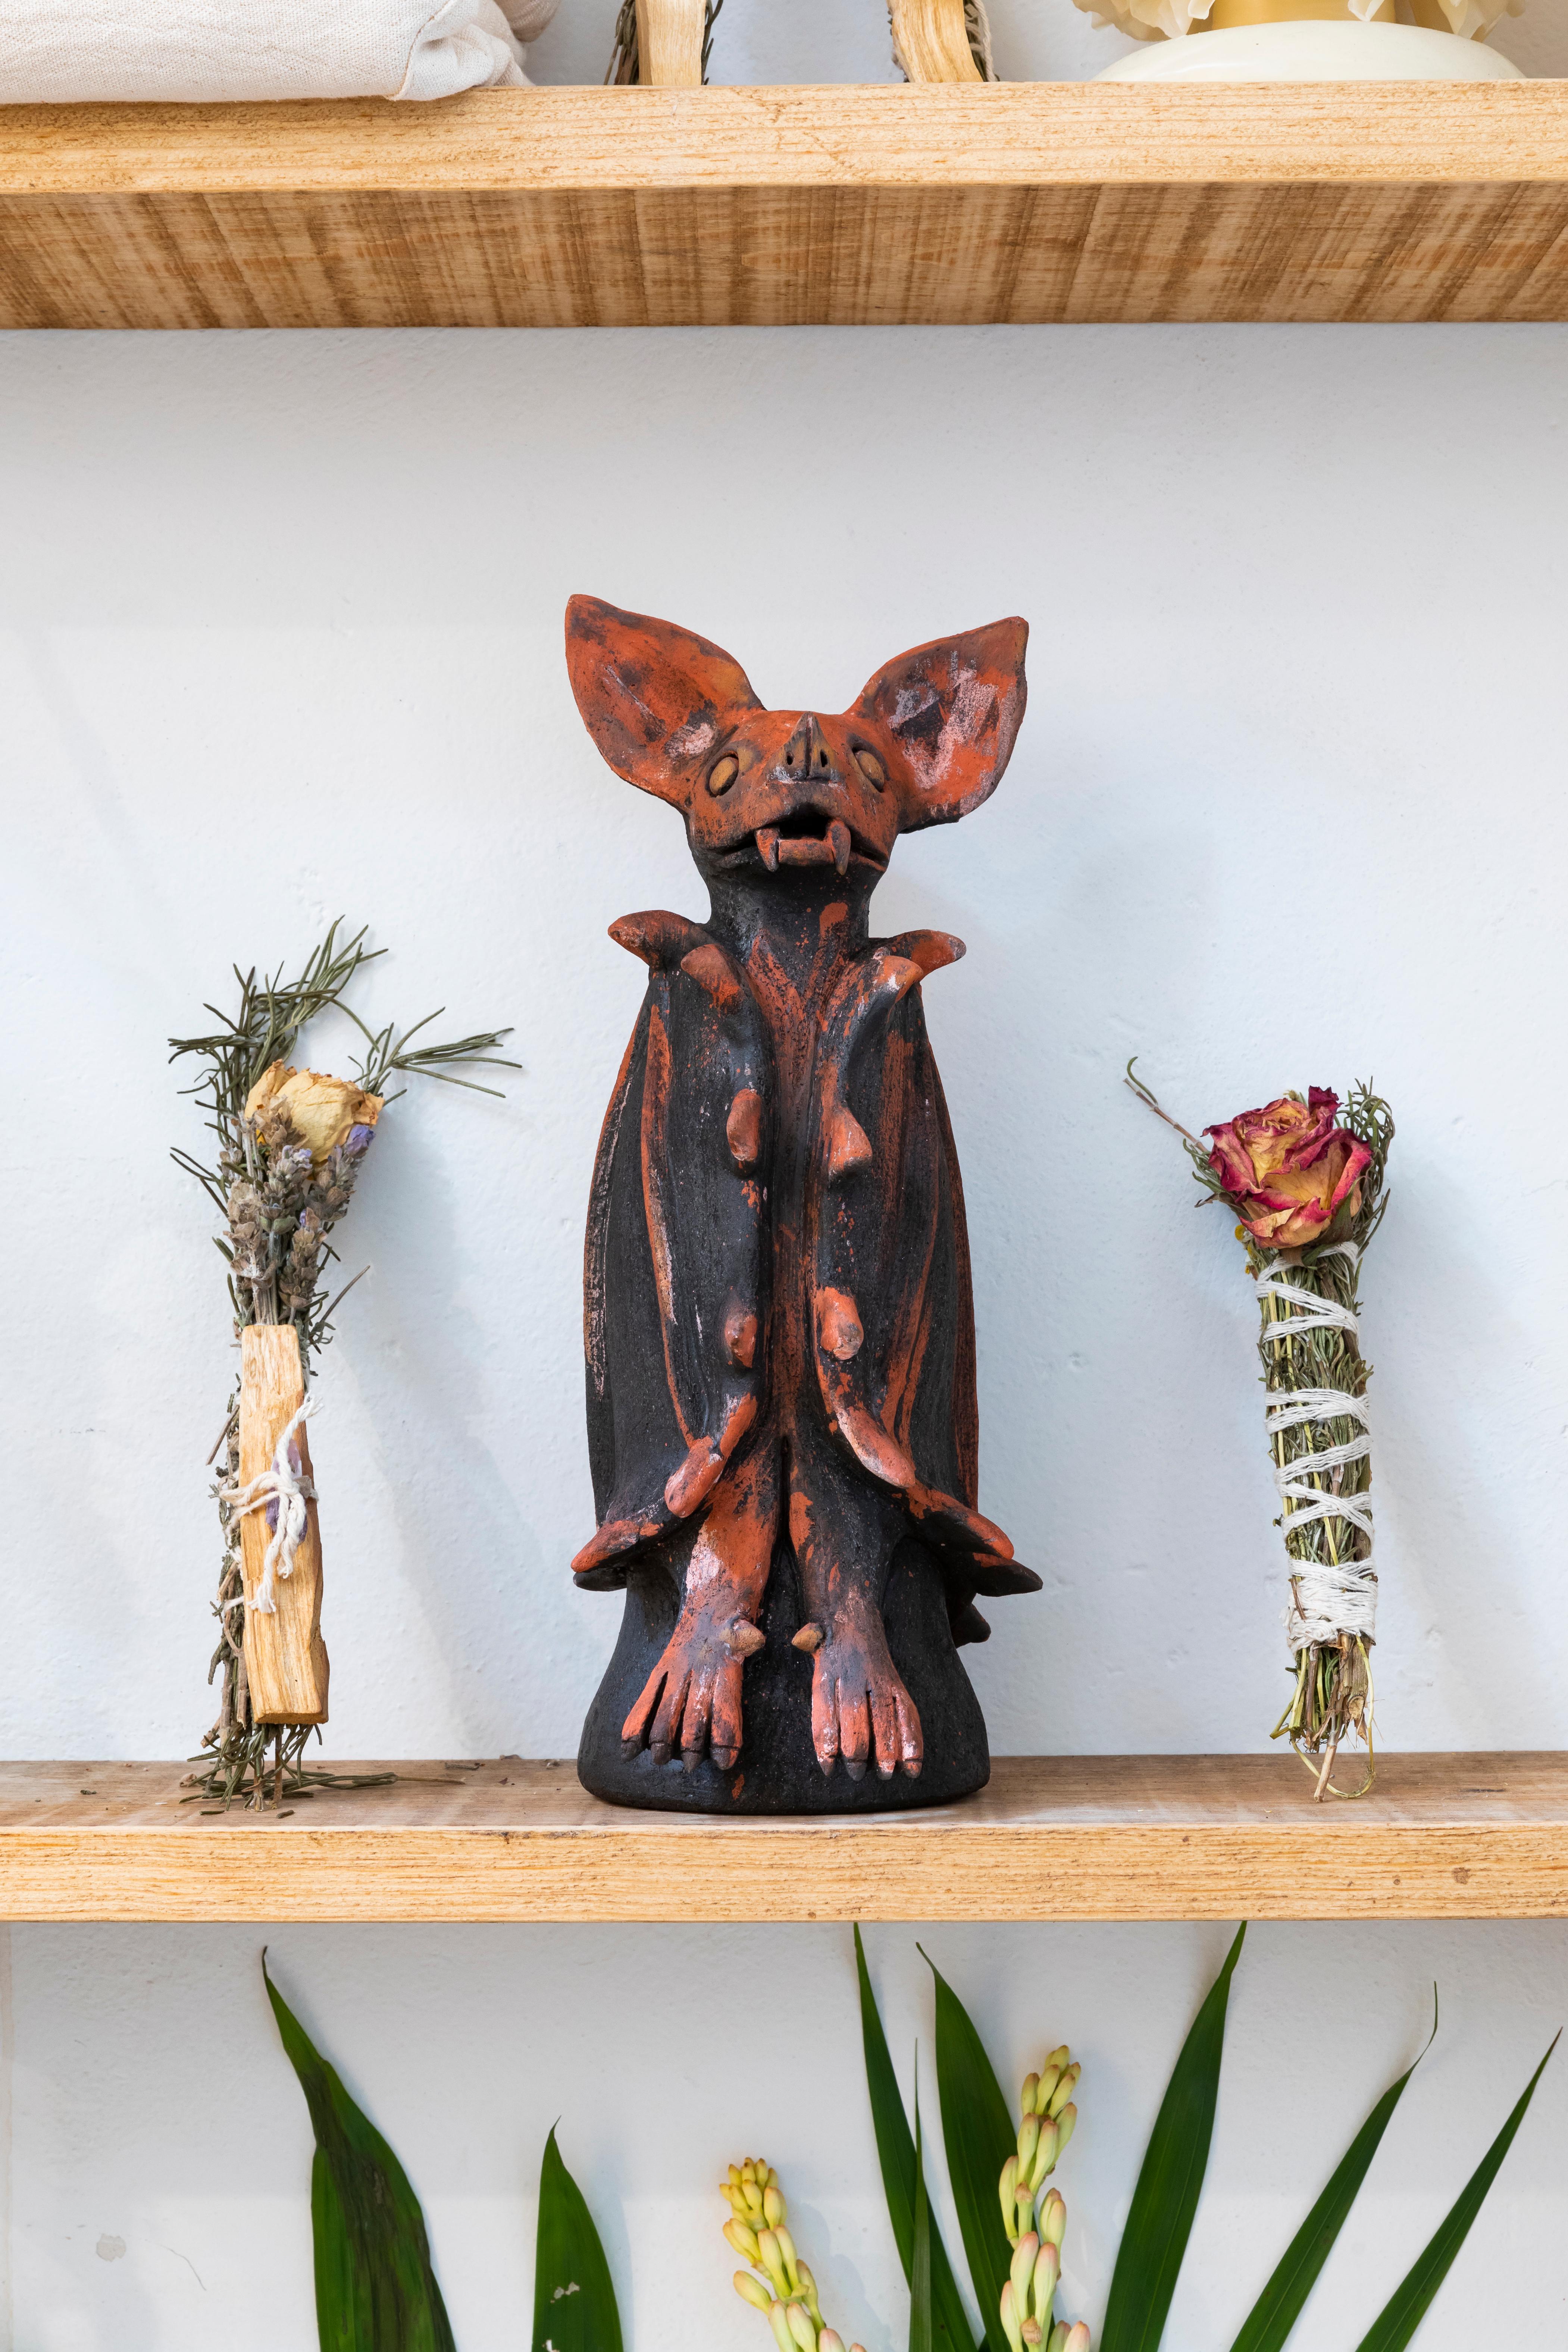 This striking sculpture tell the story of a culture and nature. Each piece is handcrafted by the Adrián Martínez Alarzón and organically tinted with natural dyes.

Bats are highly symbolic to the Zapotec Community and in the wider Mesoamerican